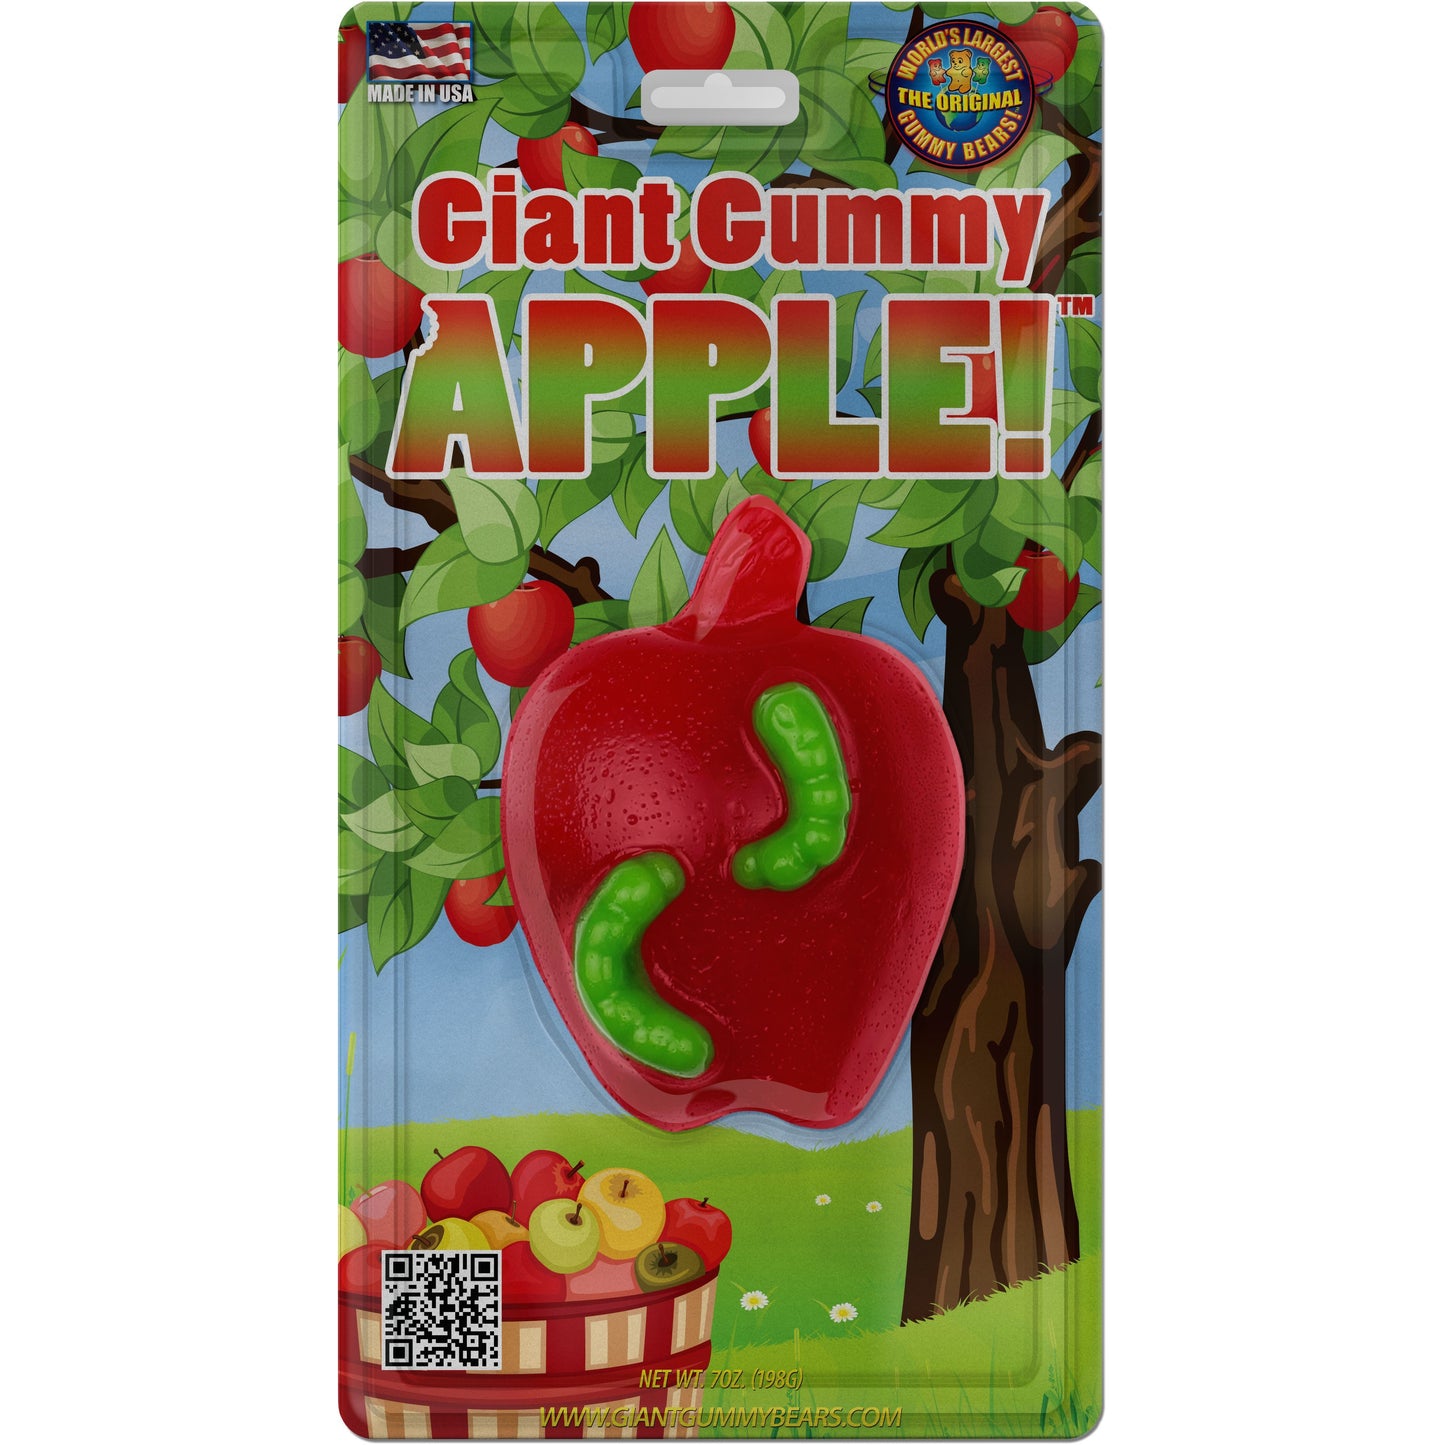 Giant Gummy Apple With Worm in Blister - Sour Apple/Cherry 7oz (198g) 12ct